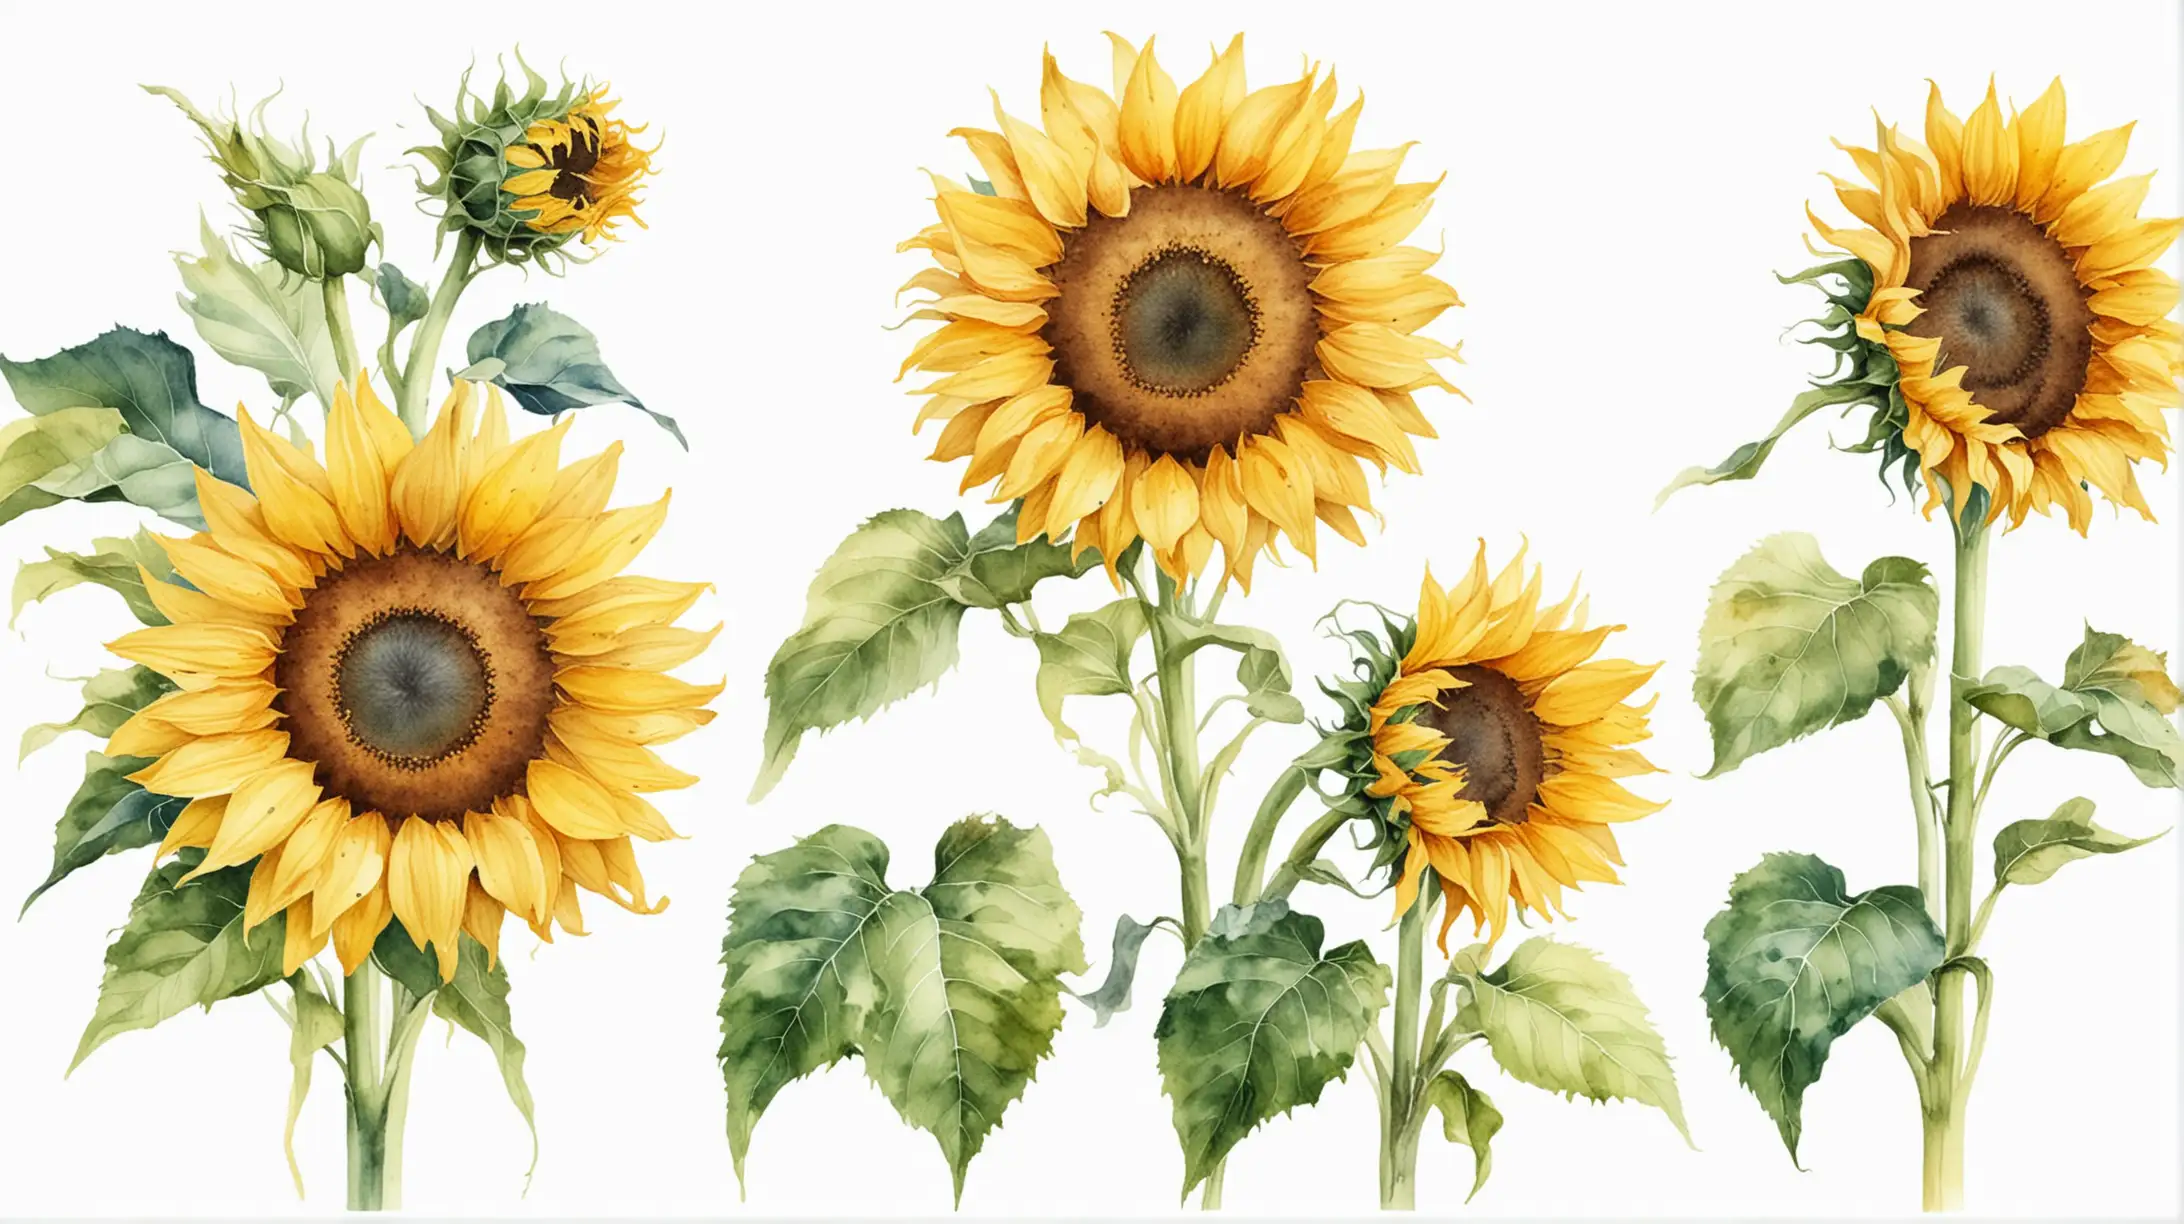 Vibrant Sunflowers in Messy Watercolor Style on White Background